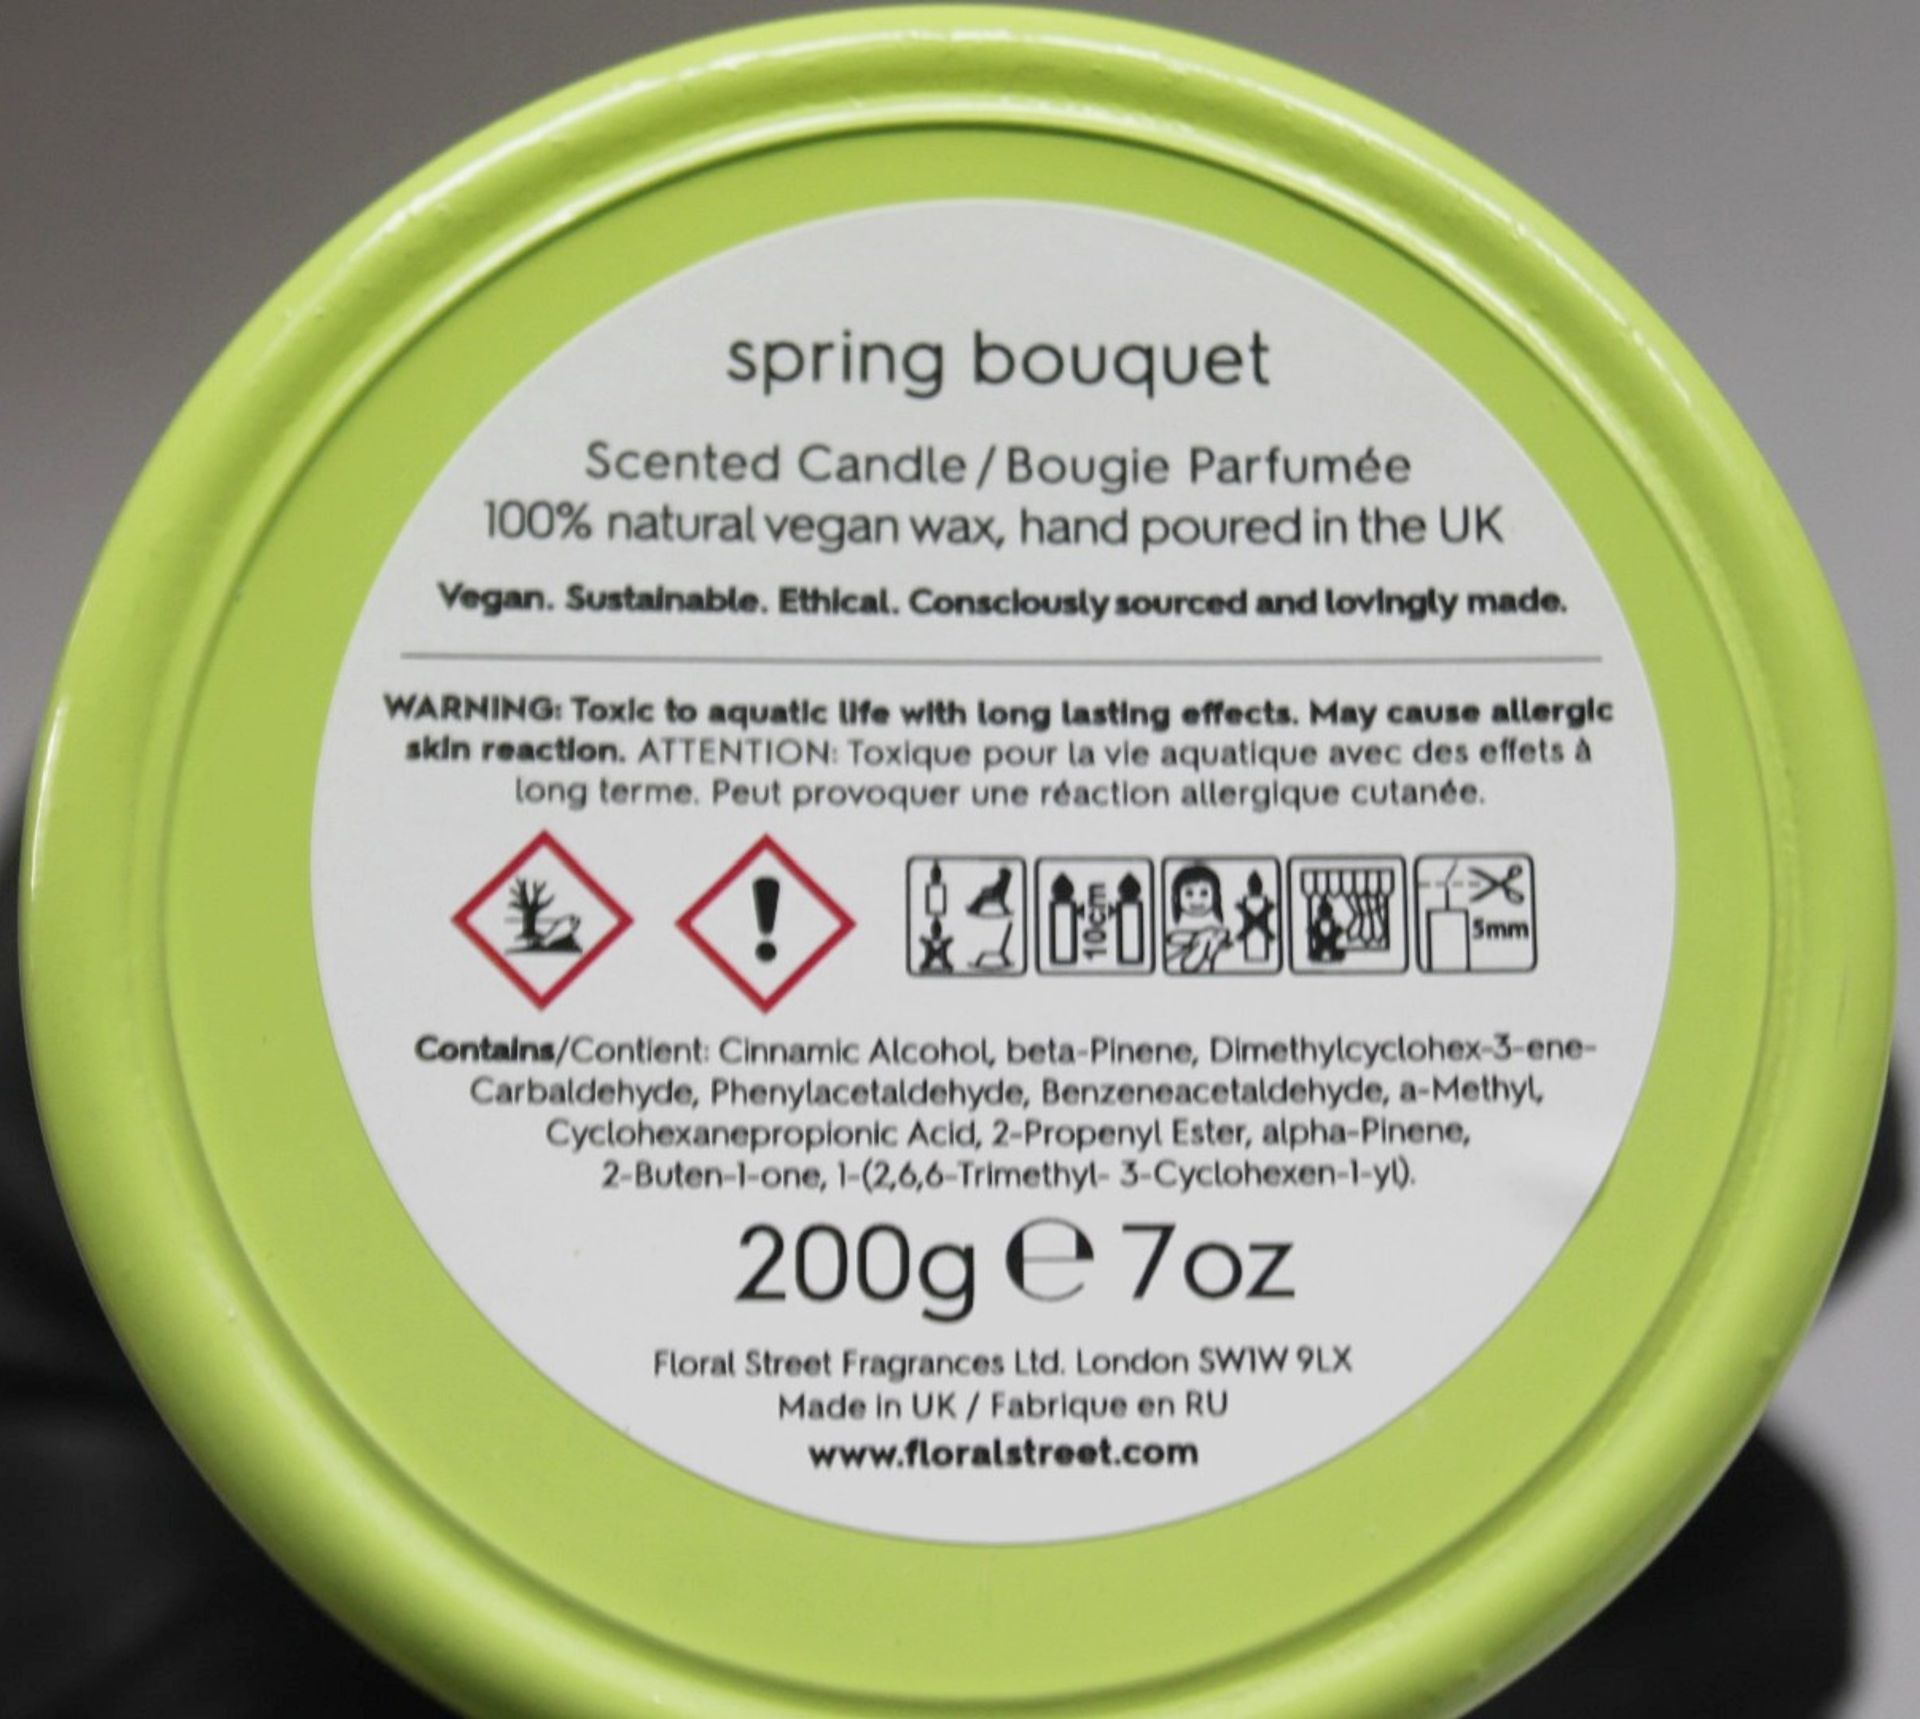 1 x FLORAL STREET Spring Bouquet Candle (200g) - Ref: 7153606/HAS/WH2-C7/02-23-1 - CL987 - Location: - Image 4 of 5